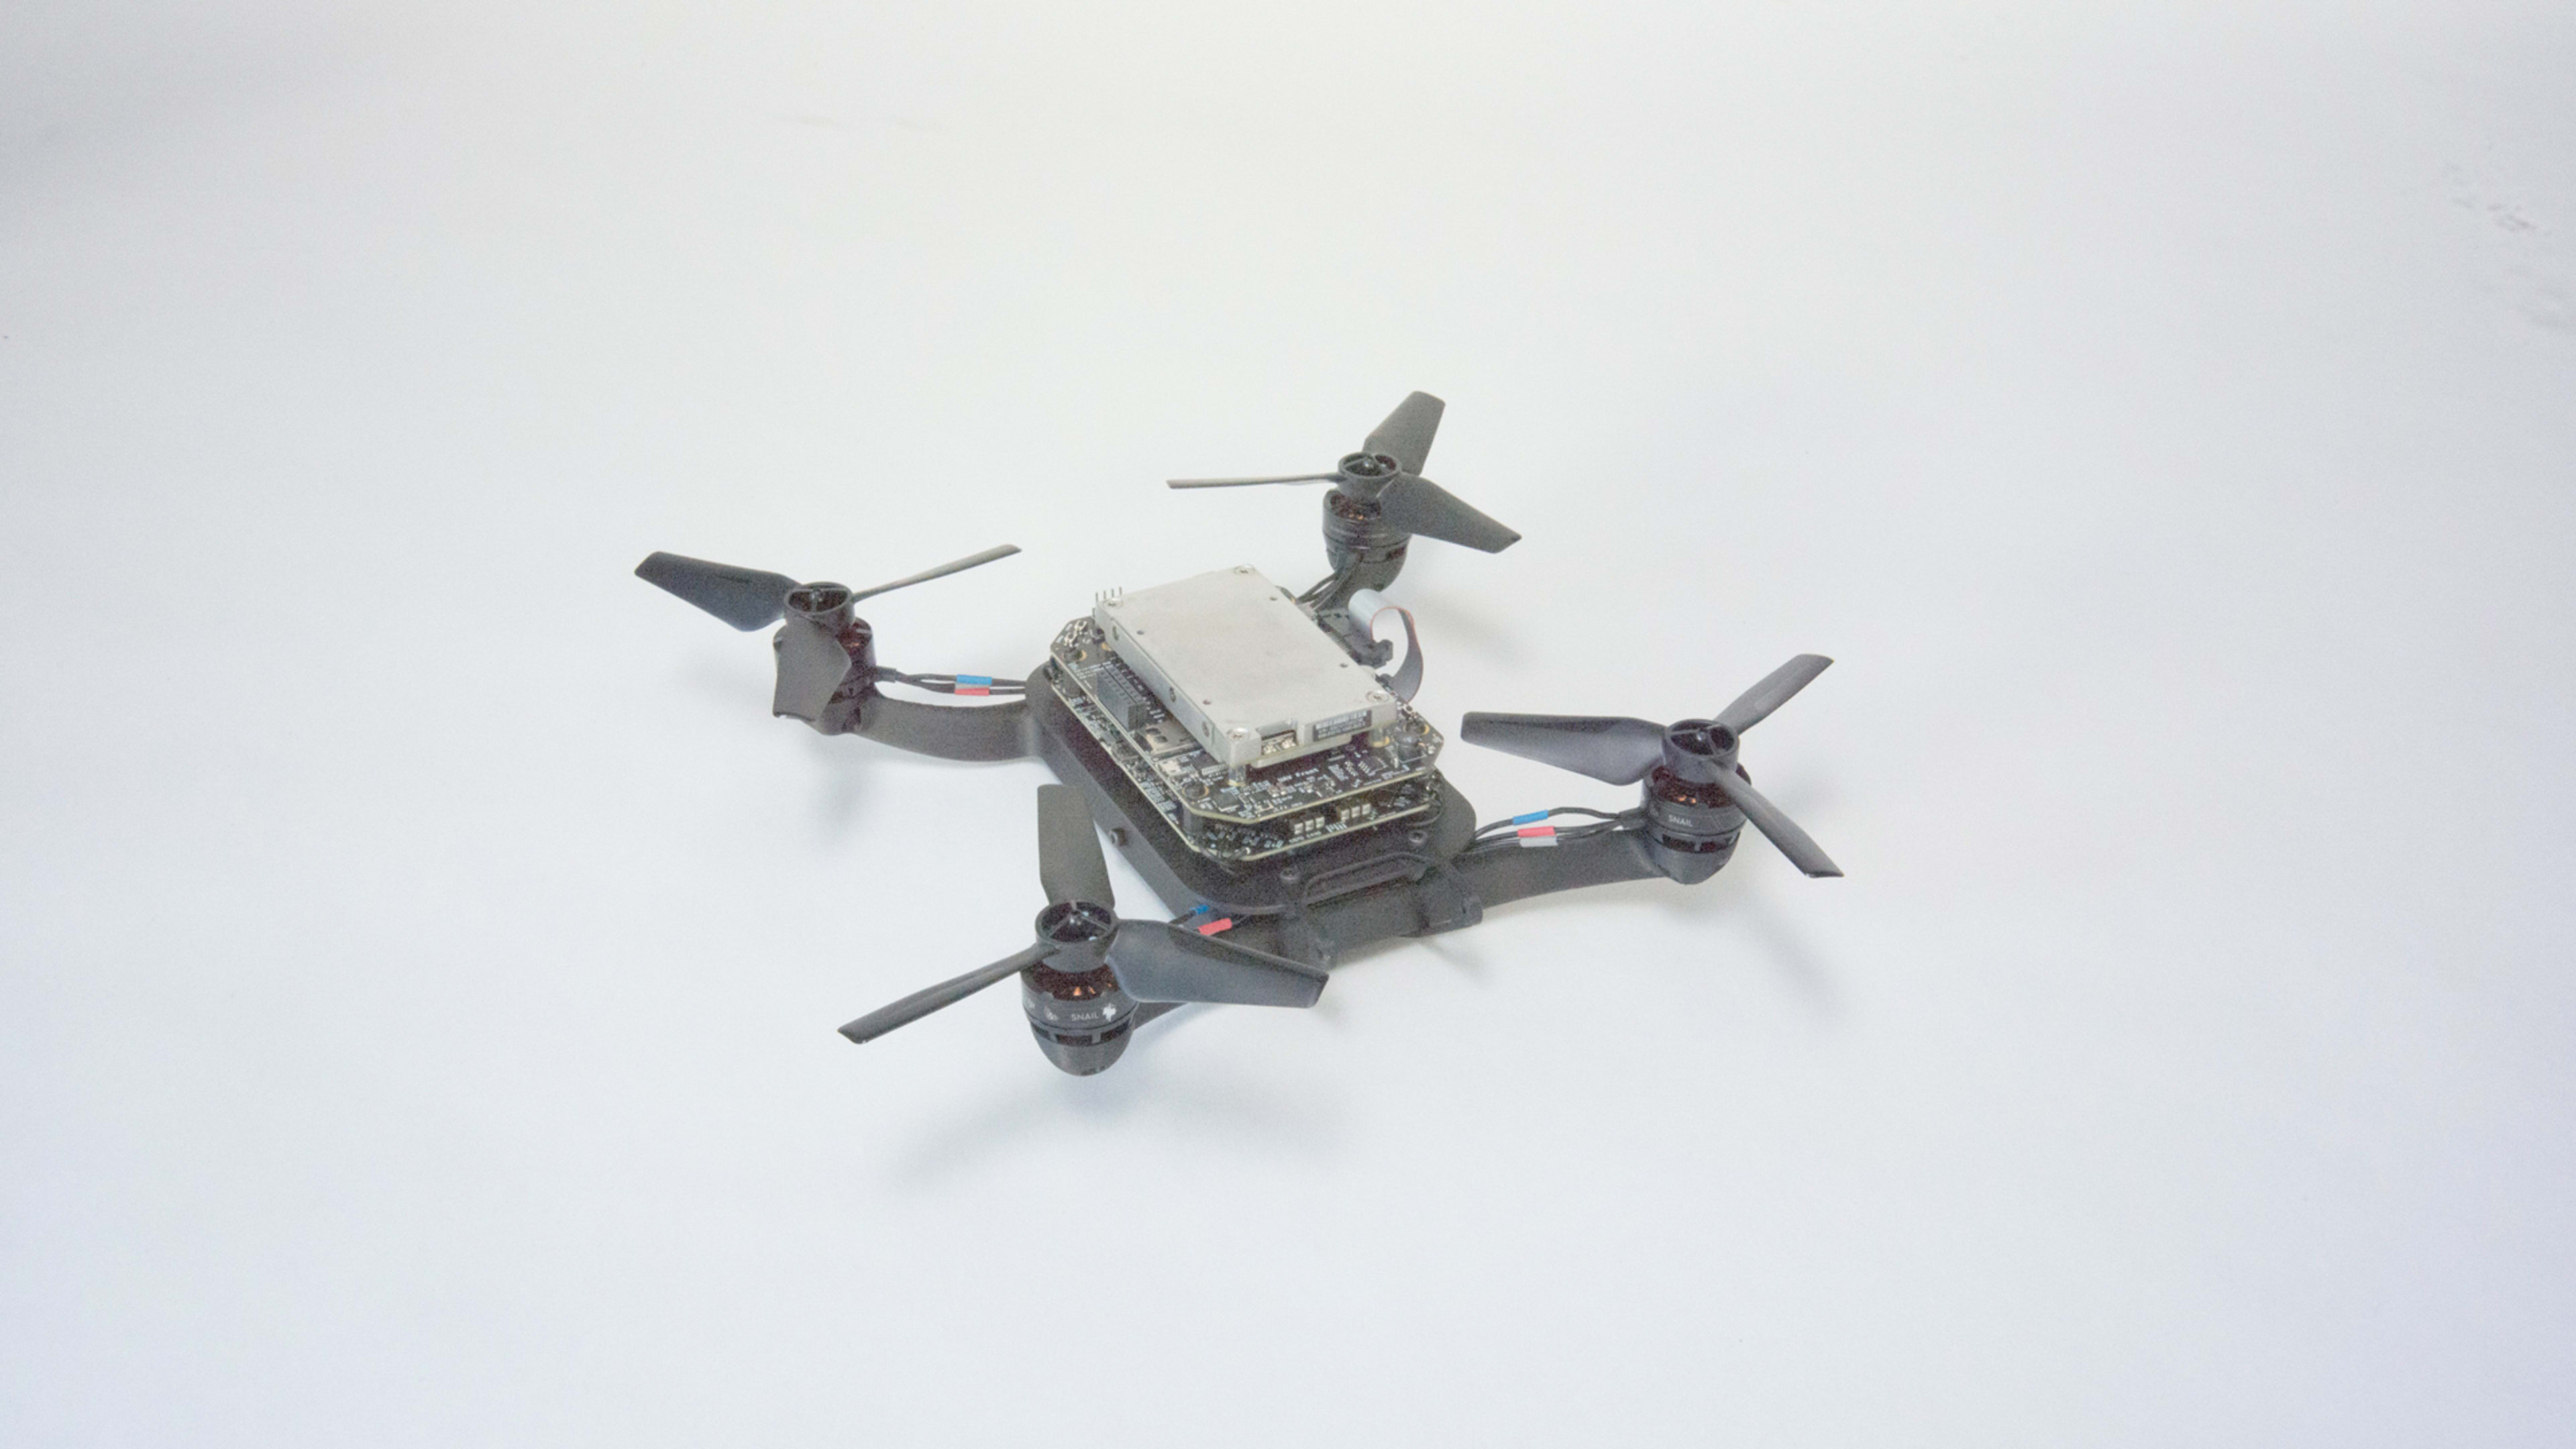 Don’t be afraid of these hallucinating MIT drones